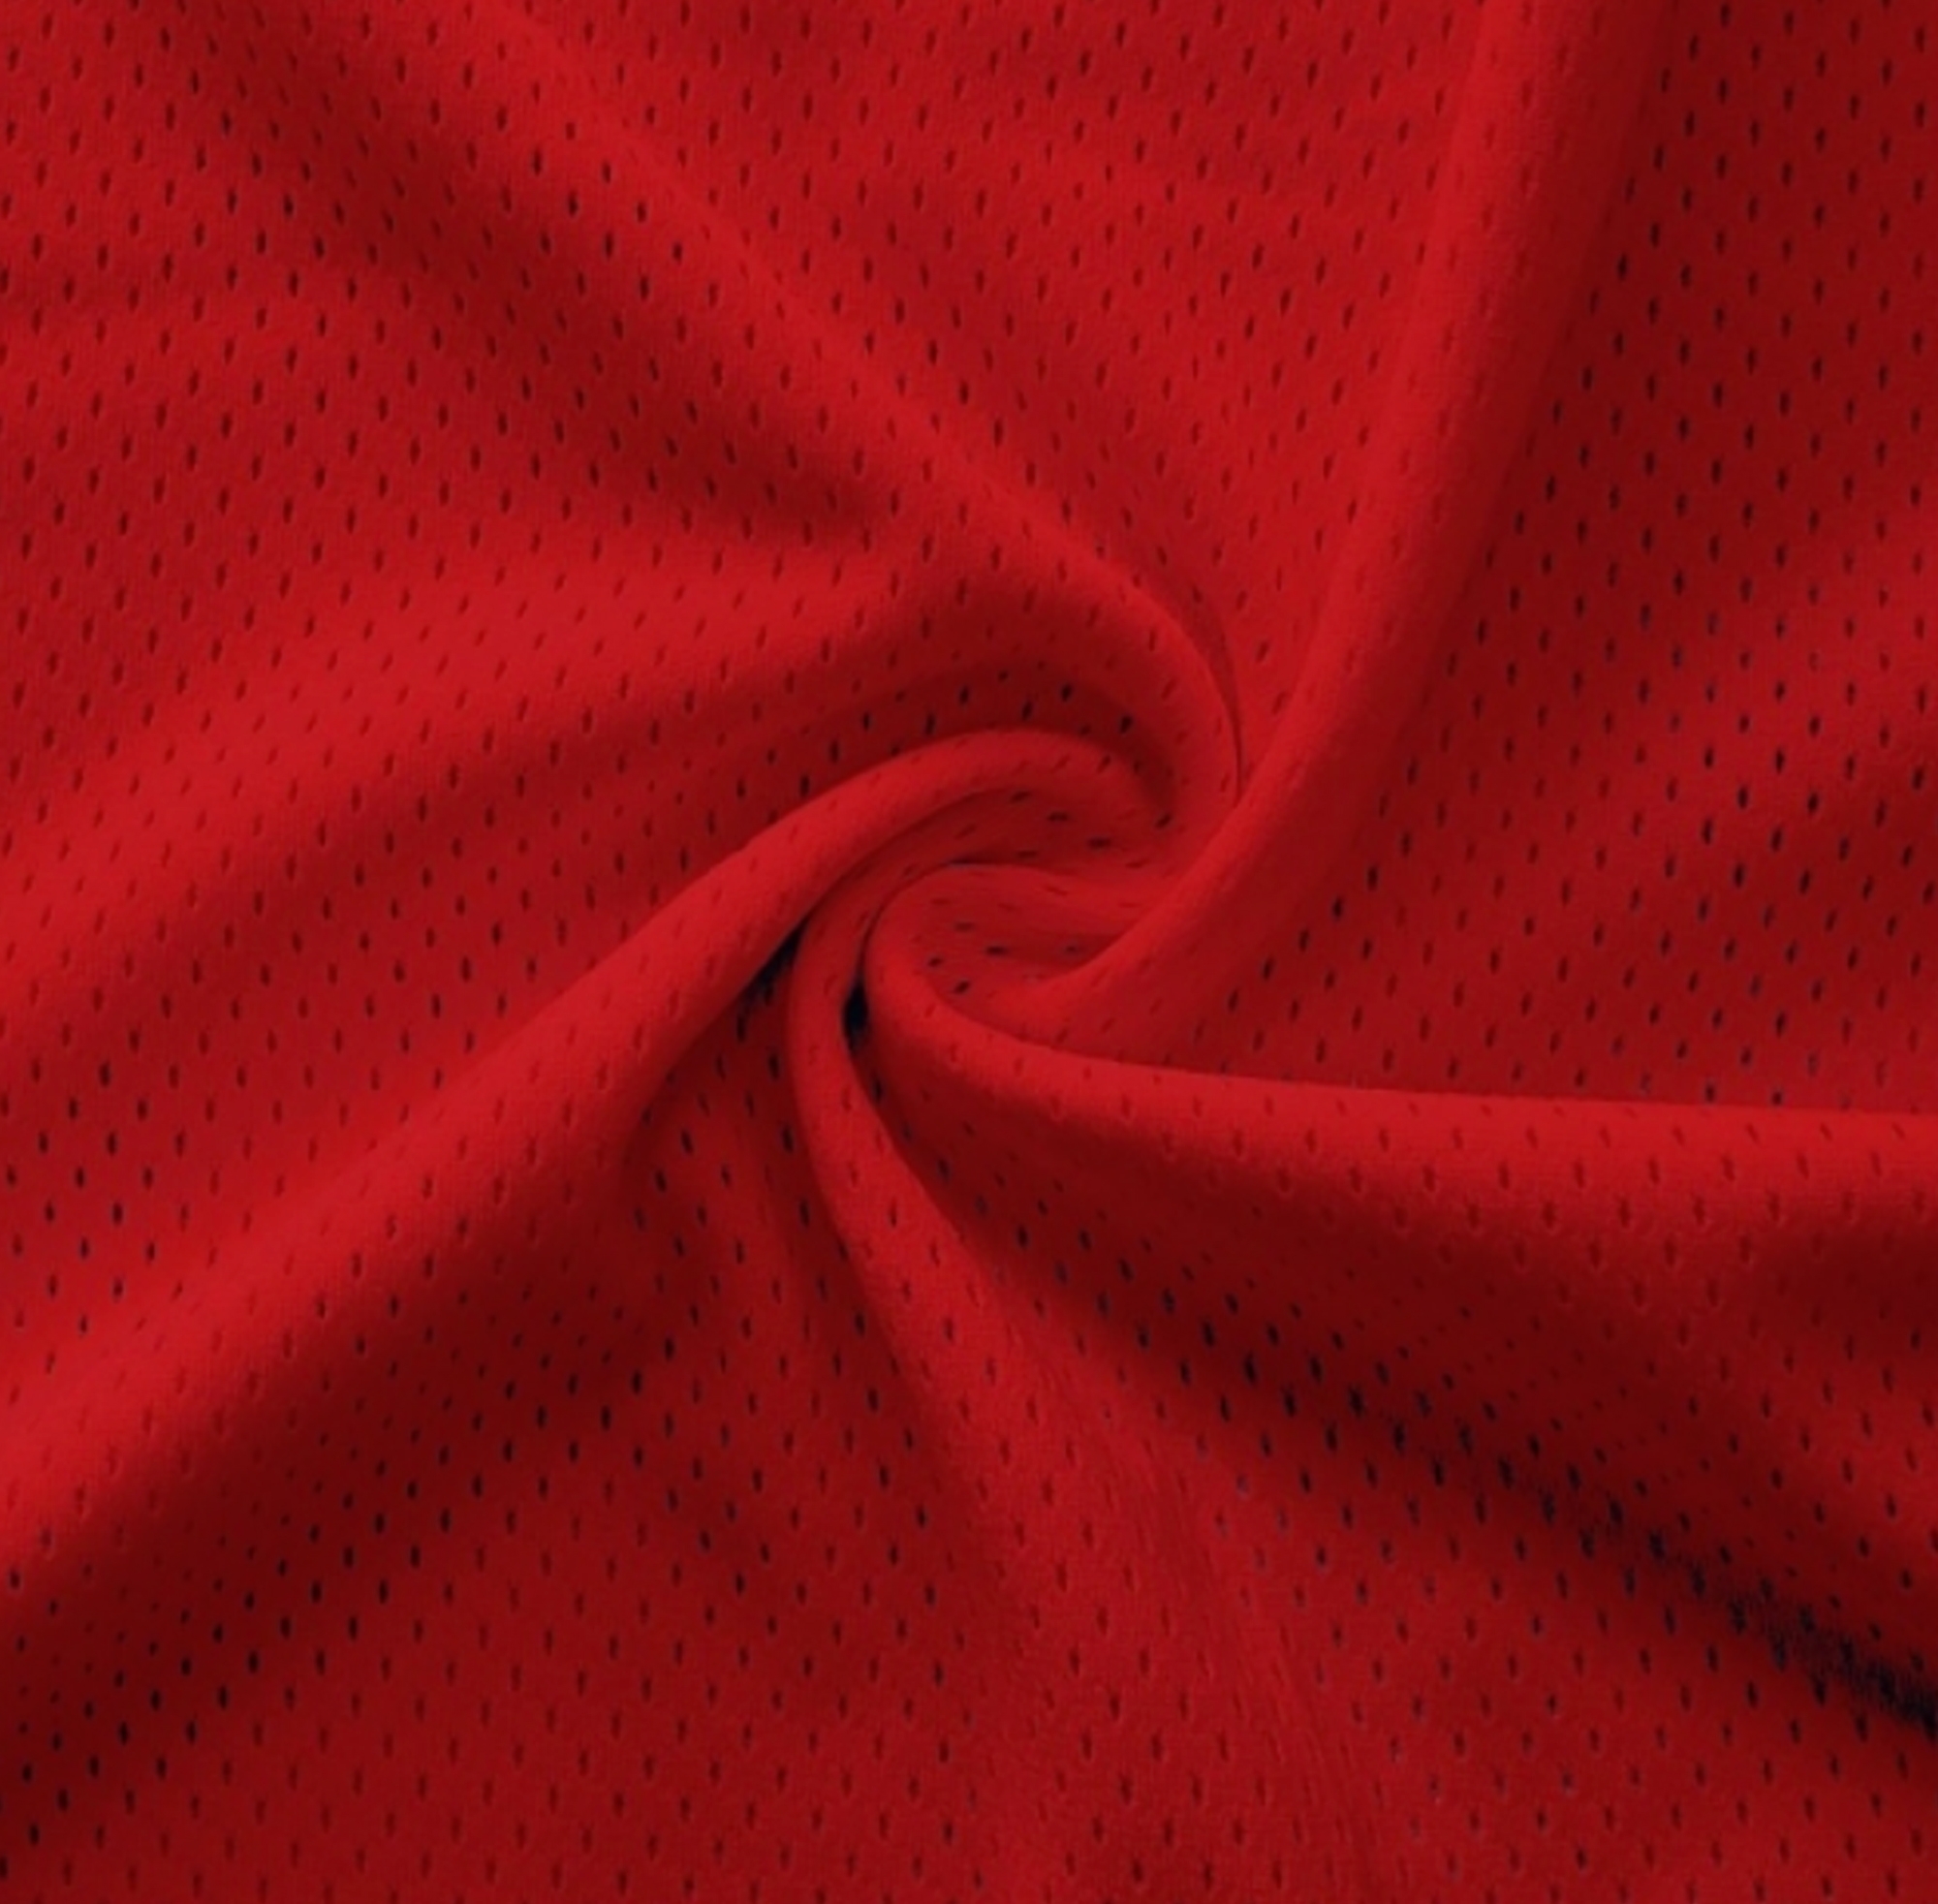 Style# FELT65909 Bulk Discount: 15 yards or more of this item qualifies for  10% off & FREE shipping. Call 877-353-3238 mention BULK ORDER* to place